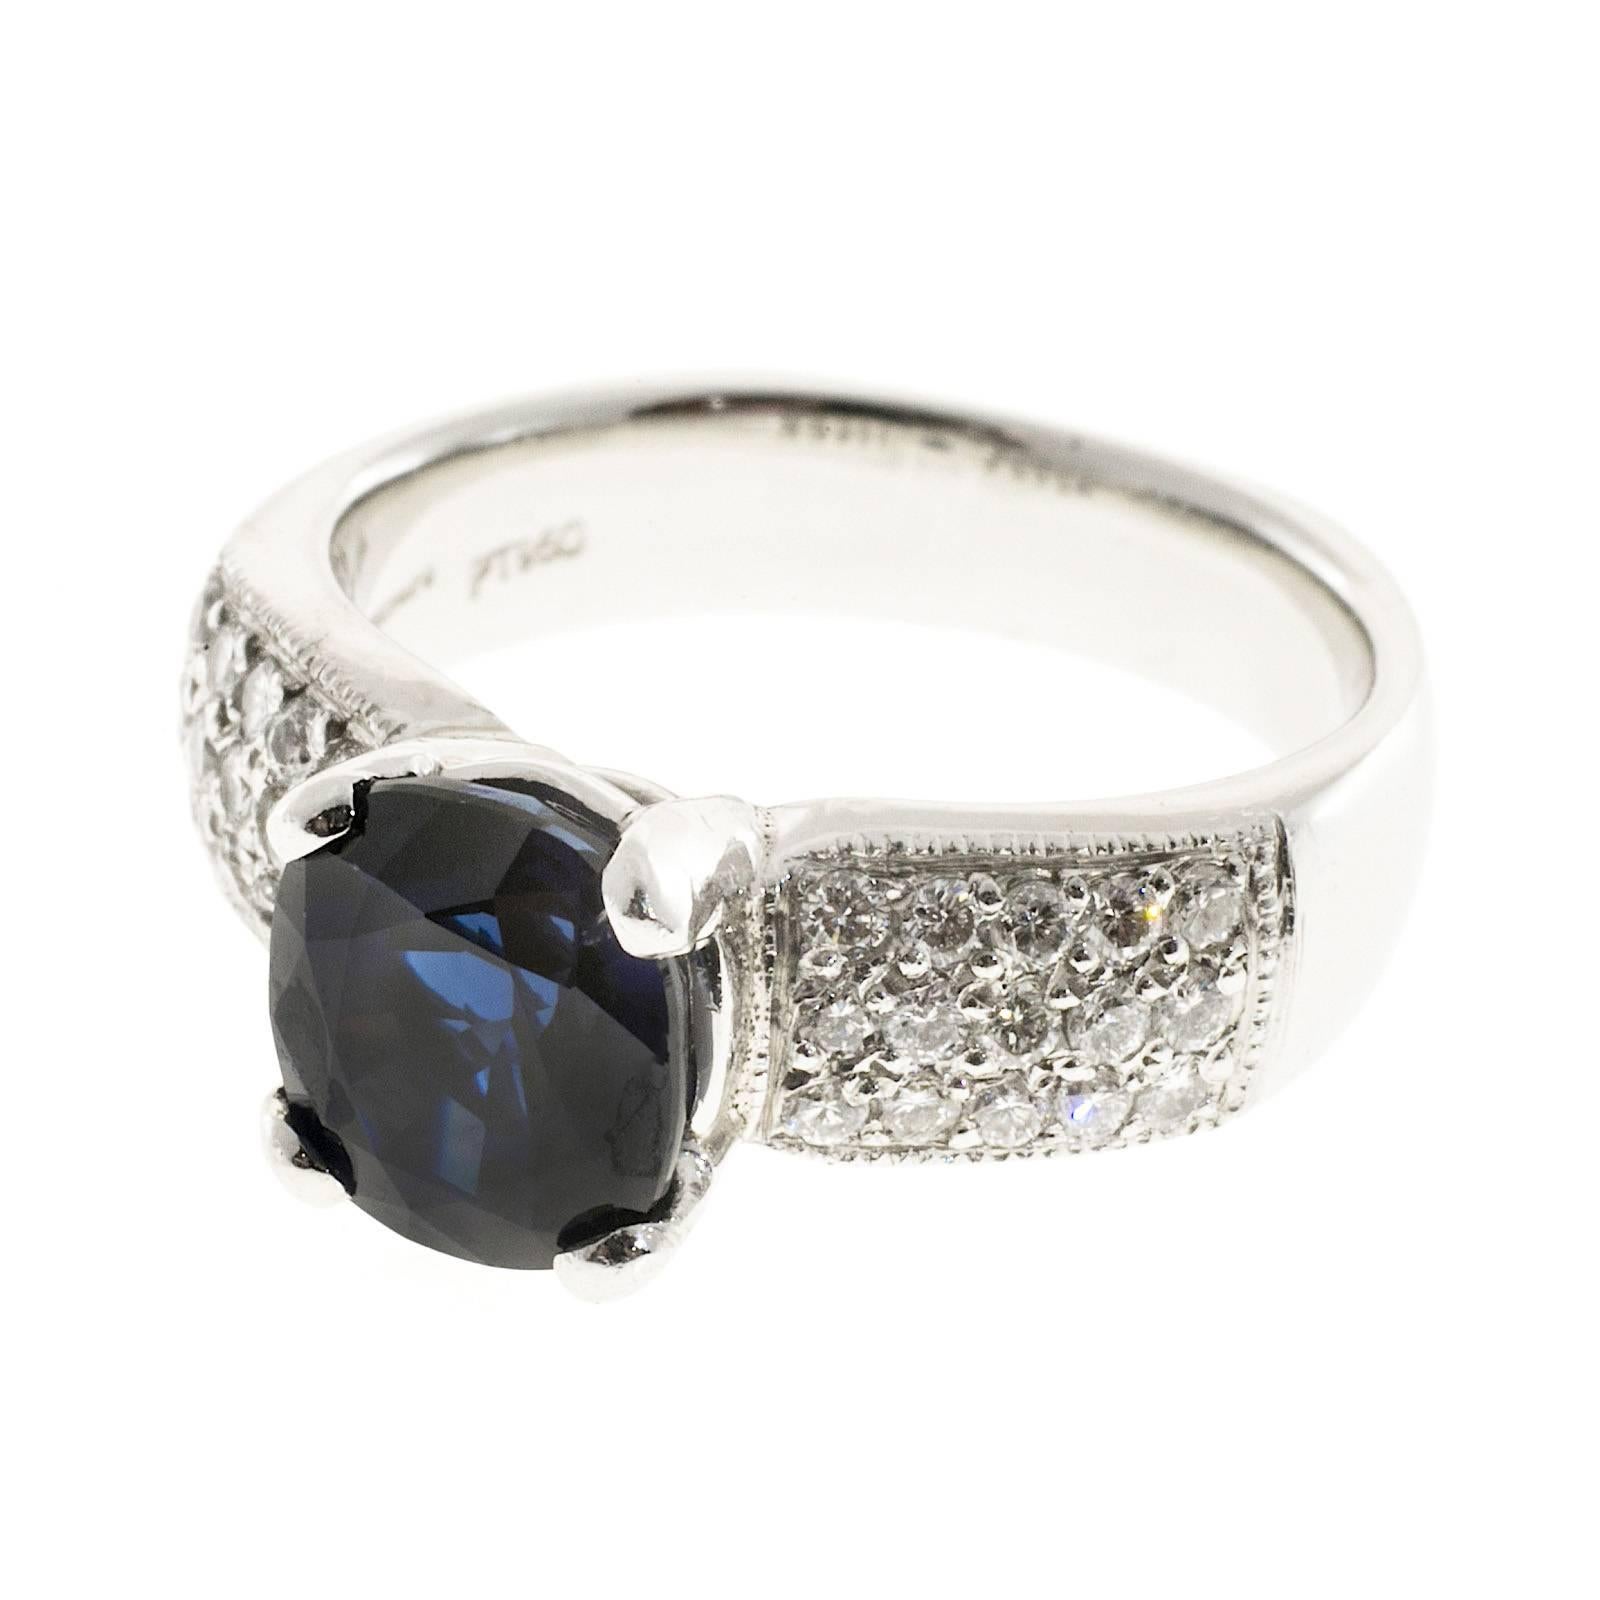 GIA certified simple heat only Sapphire engagement ring, approx. total weight 1.75cts. The setting is from Simayof.

1 GIA certified cushion cut natural Sapphire  blue color, CMG type II, approx. total weight 1.75cts, simple heat only TE no other